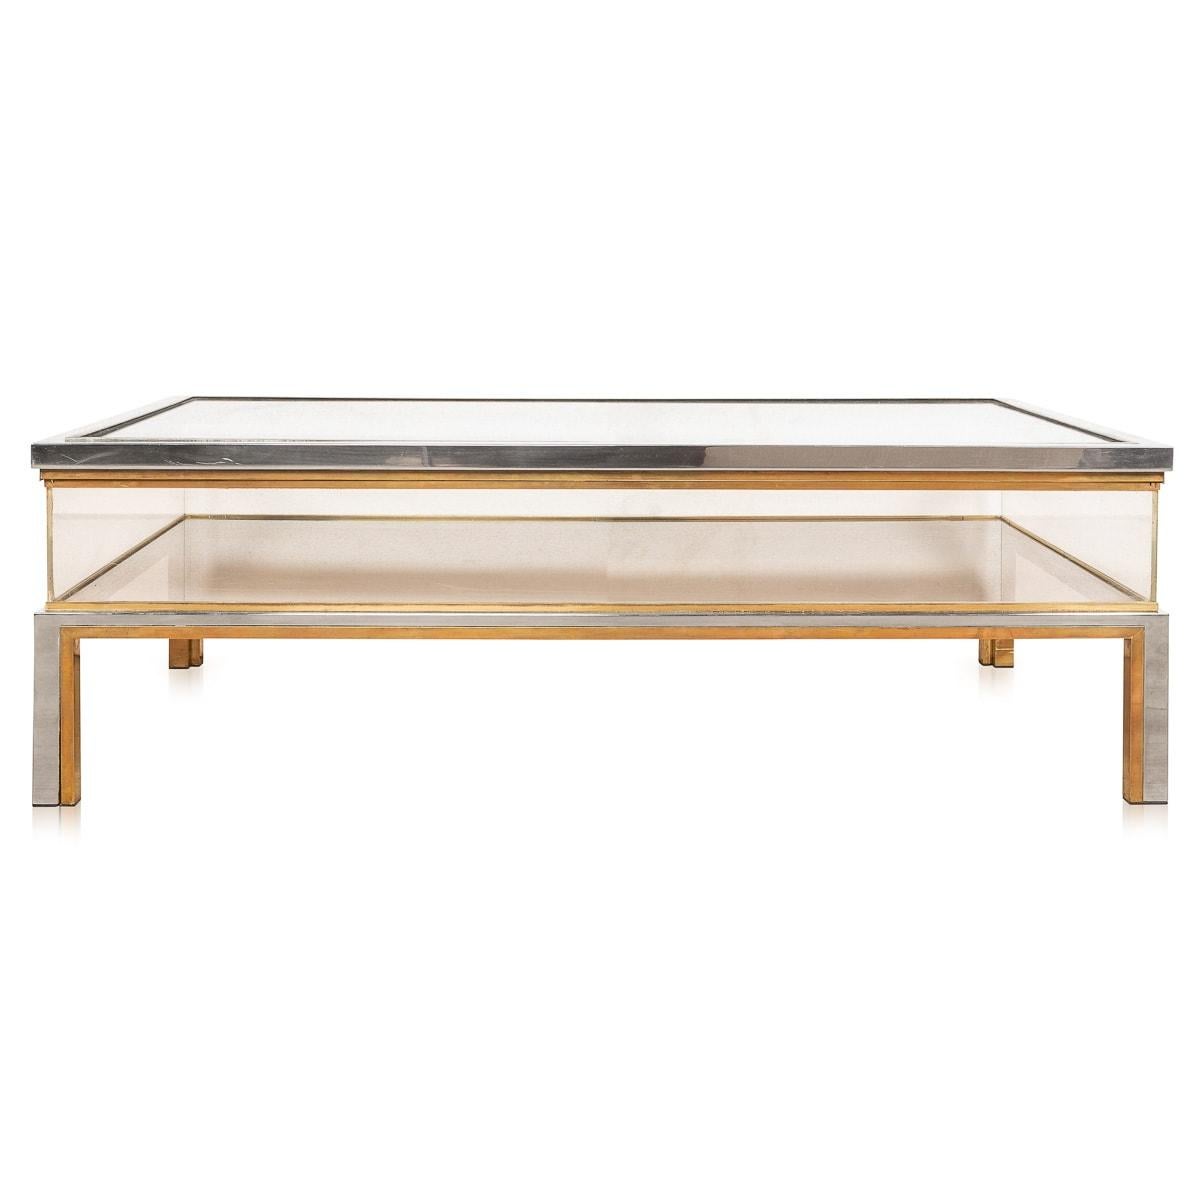 A lovely “showcase“ coffee table made by Romeo Rega, Italy, circa 1970. The chrome and brass structure supporting two large glass shelves, this style of table is known as a “vitrine“ (or showcase) coffee table and it is one of the more iconic